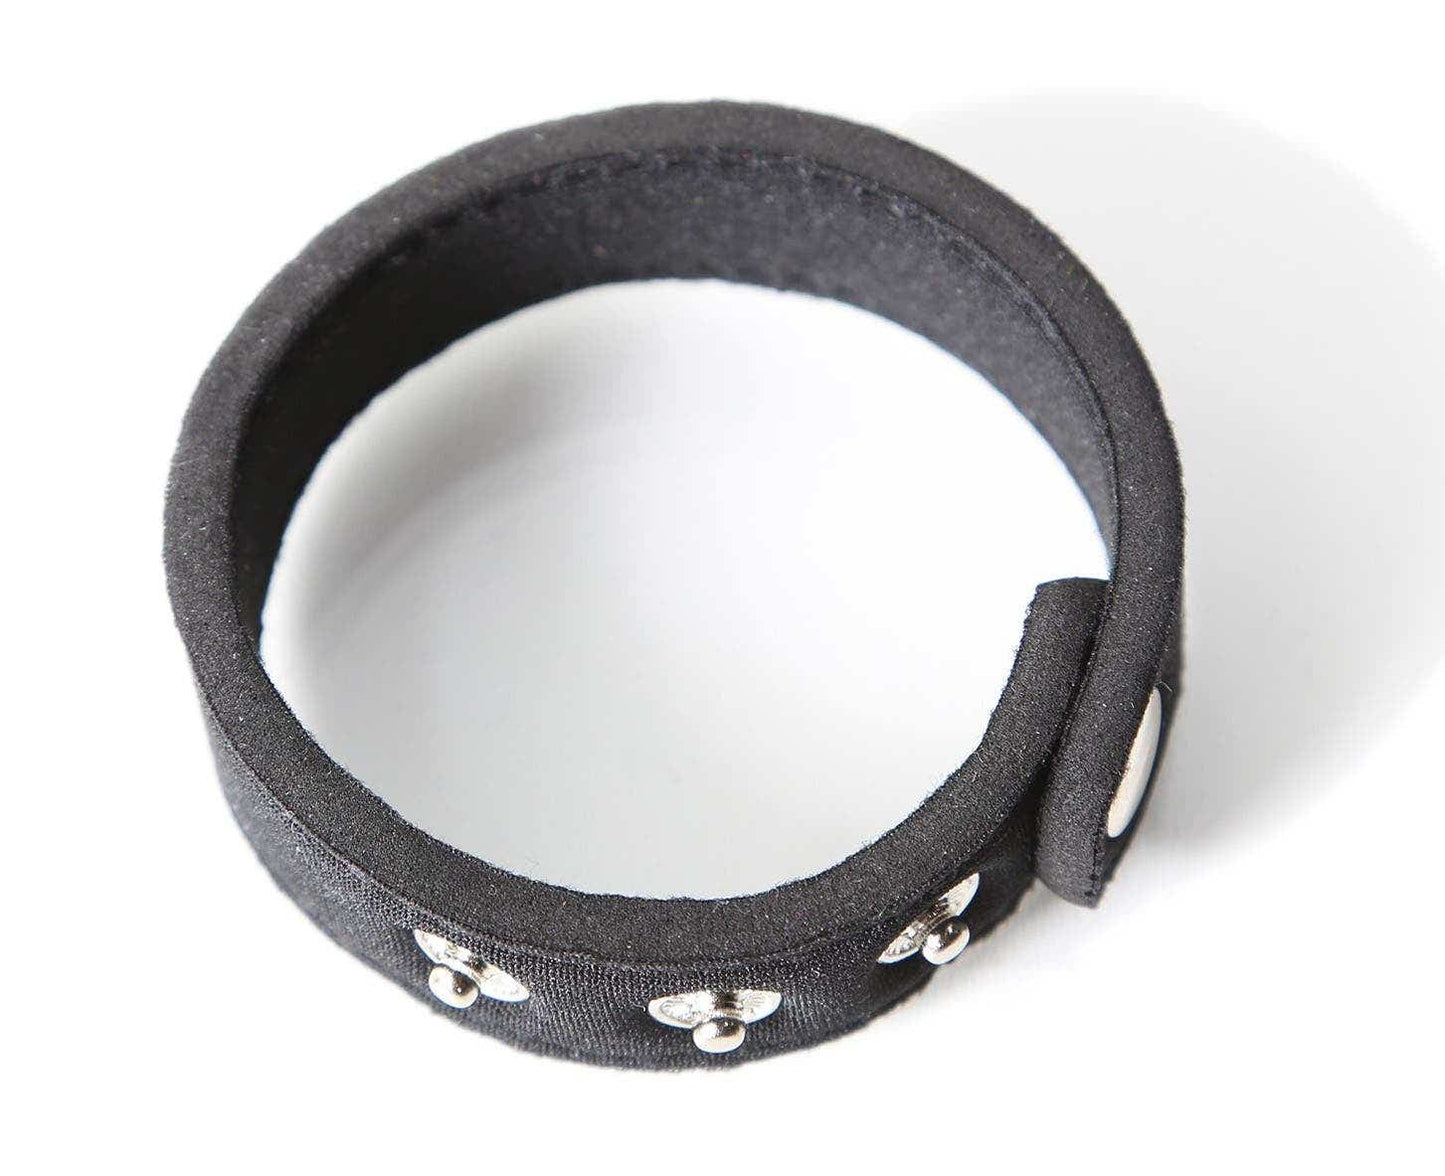 Neoprene snap cockrings - Black - Thorn & Feather